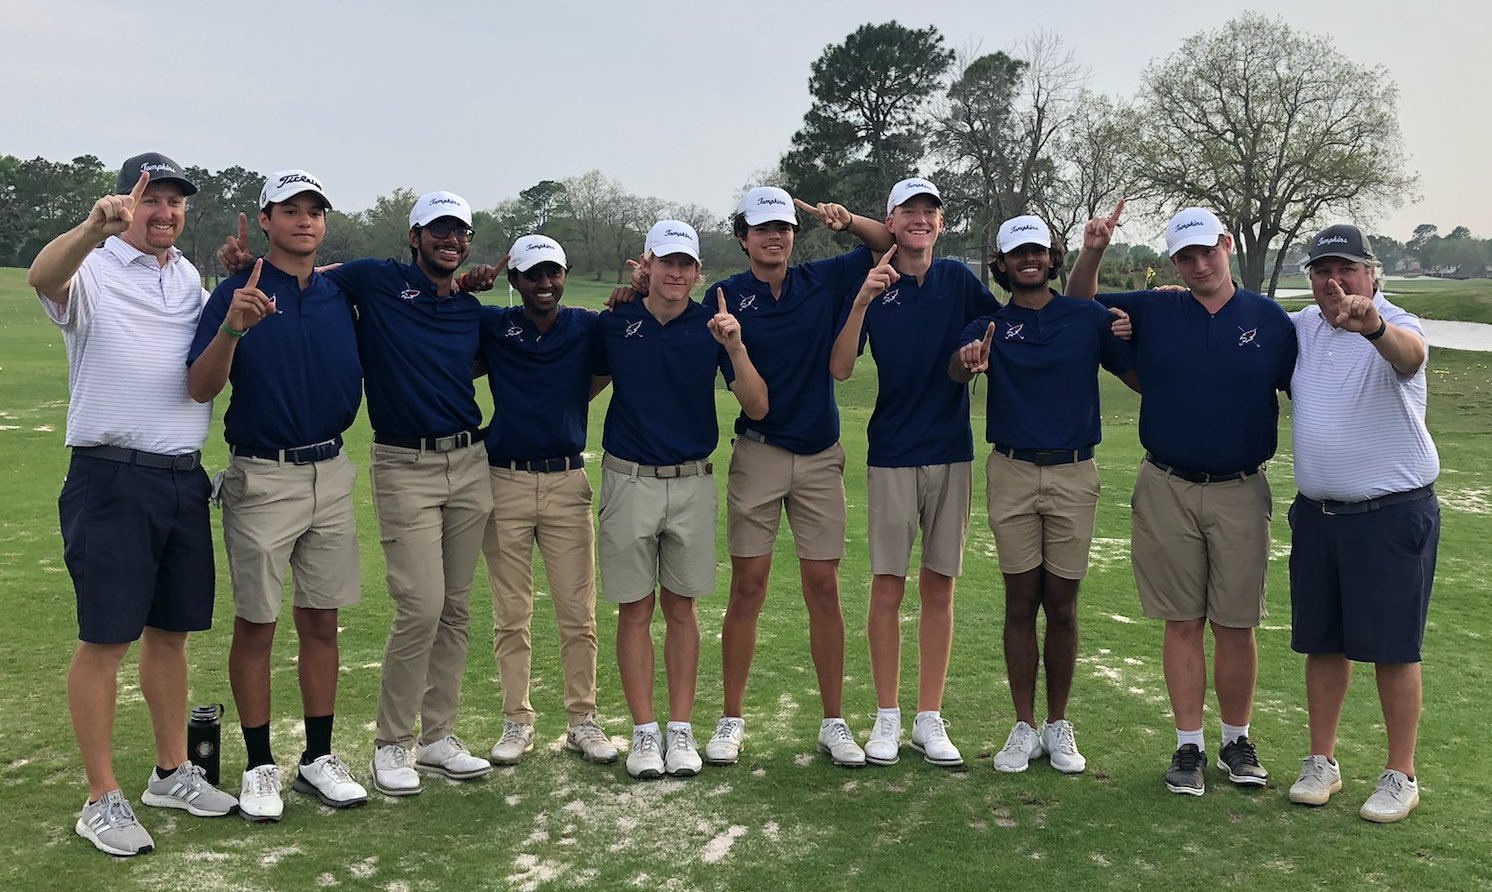 The Tompkins boys golf team took home gold at the district tournament and a spot in the regional tournament.